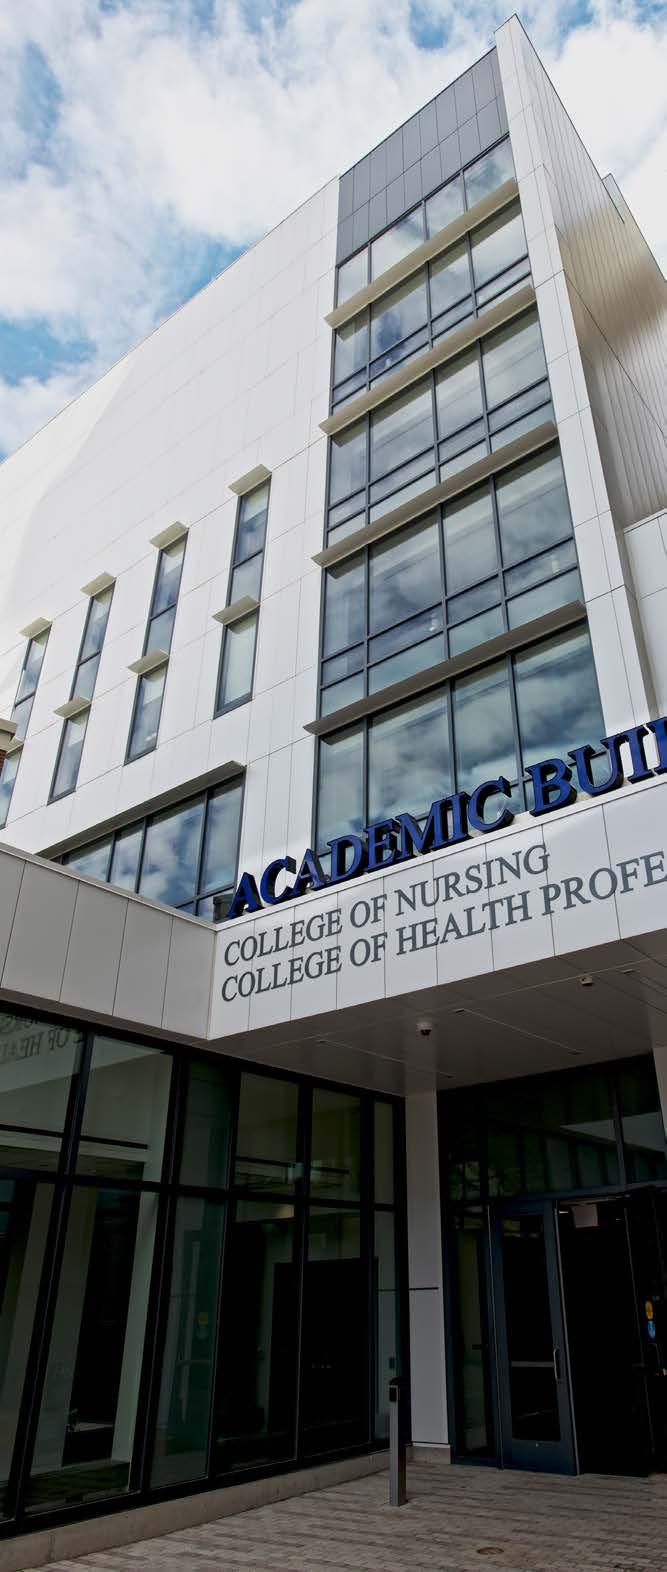 NEW ACADEMIC BUILDING IS HOME TO COLLEGE OF NURSING For the first time in its more than half-century existence, Upstate College of Nursing has a new home Excitement grew as faculty, students and